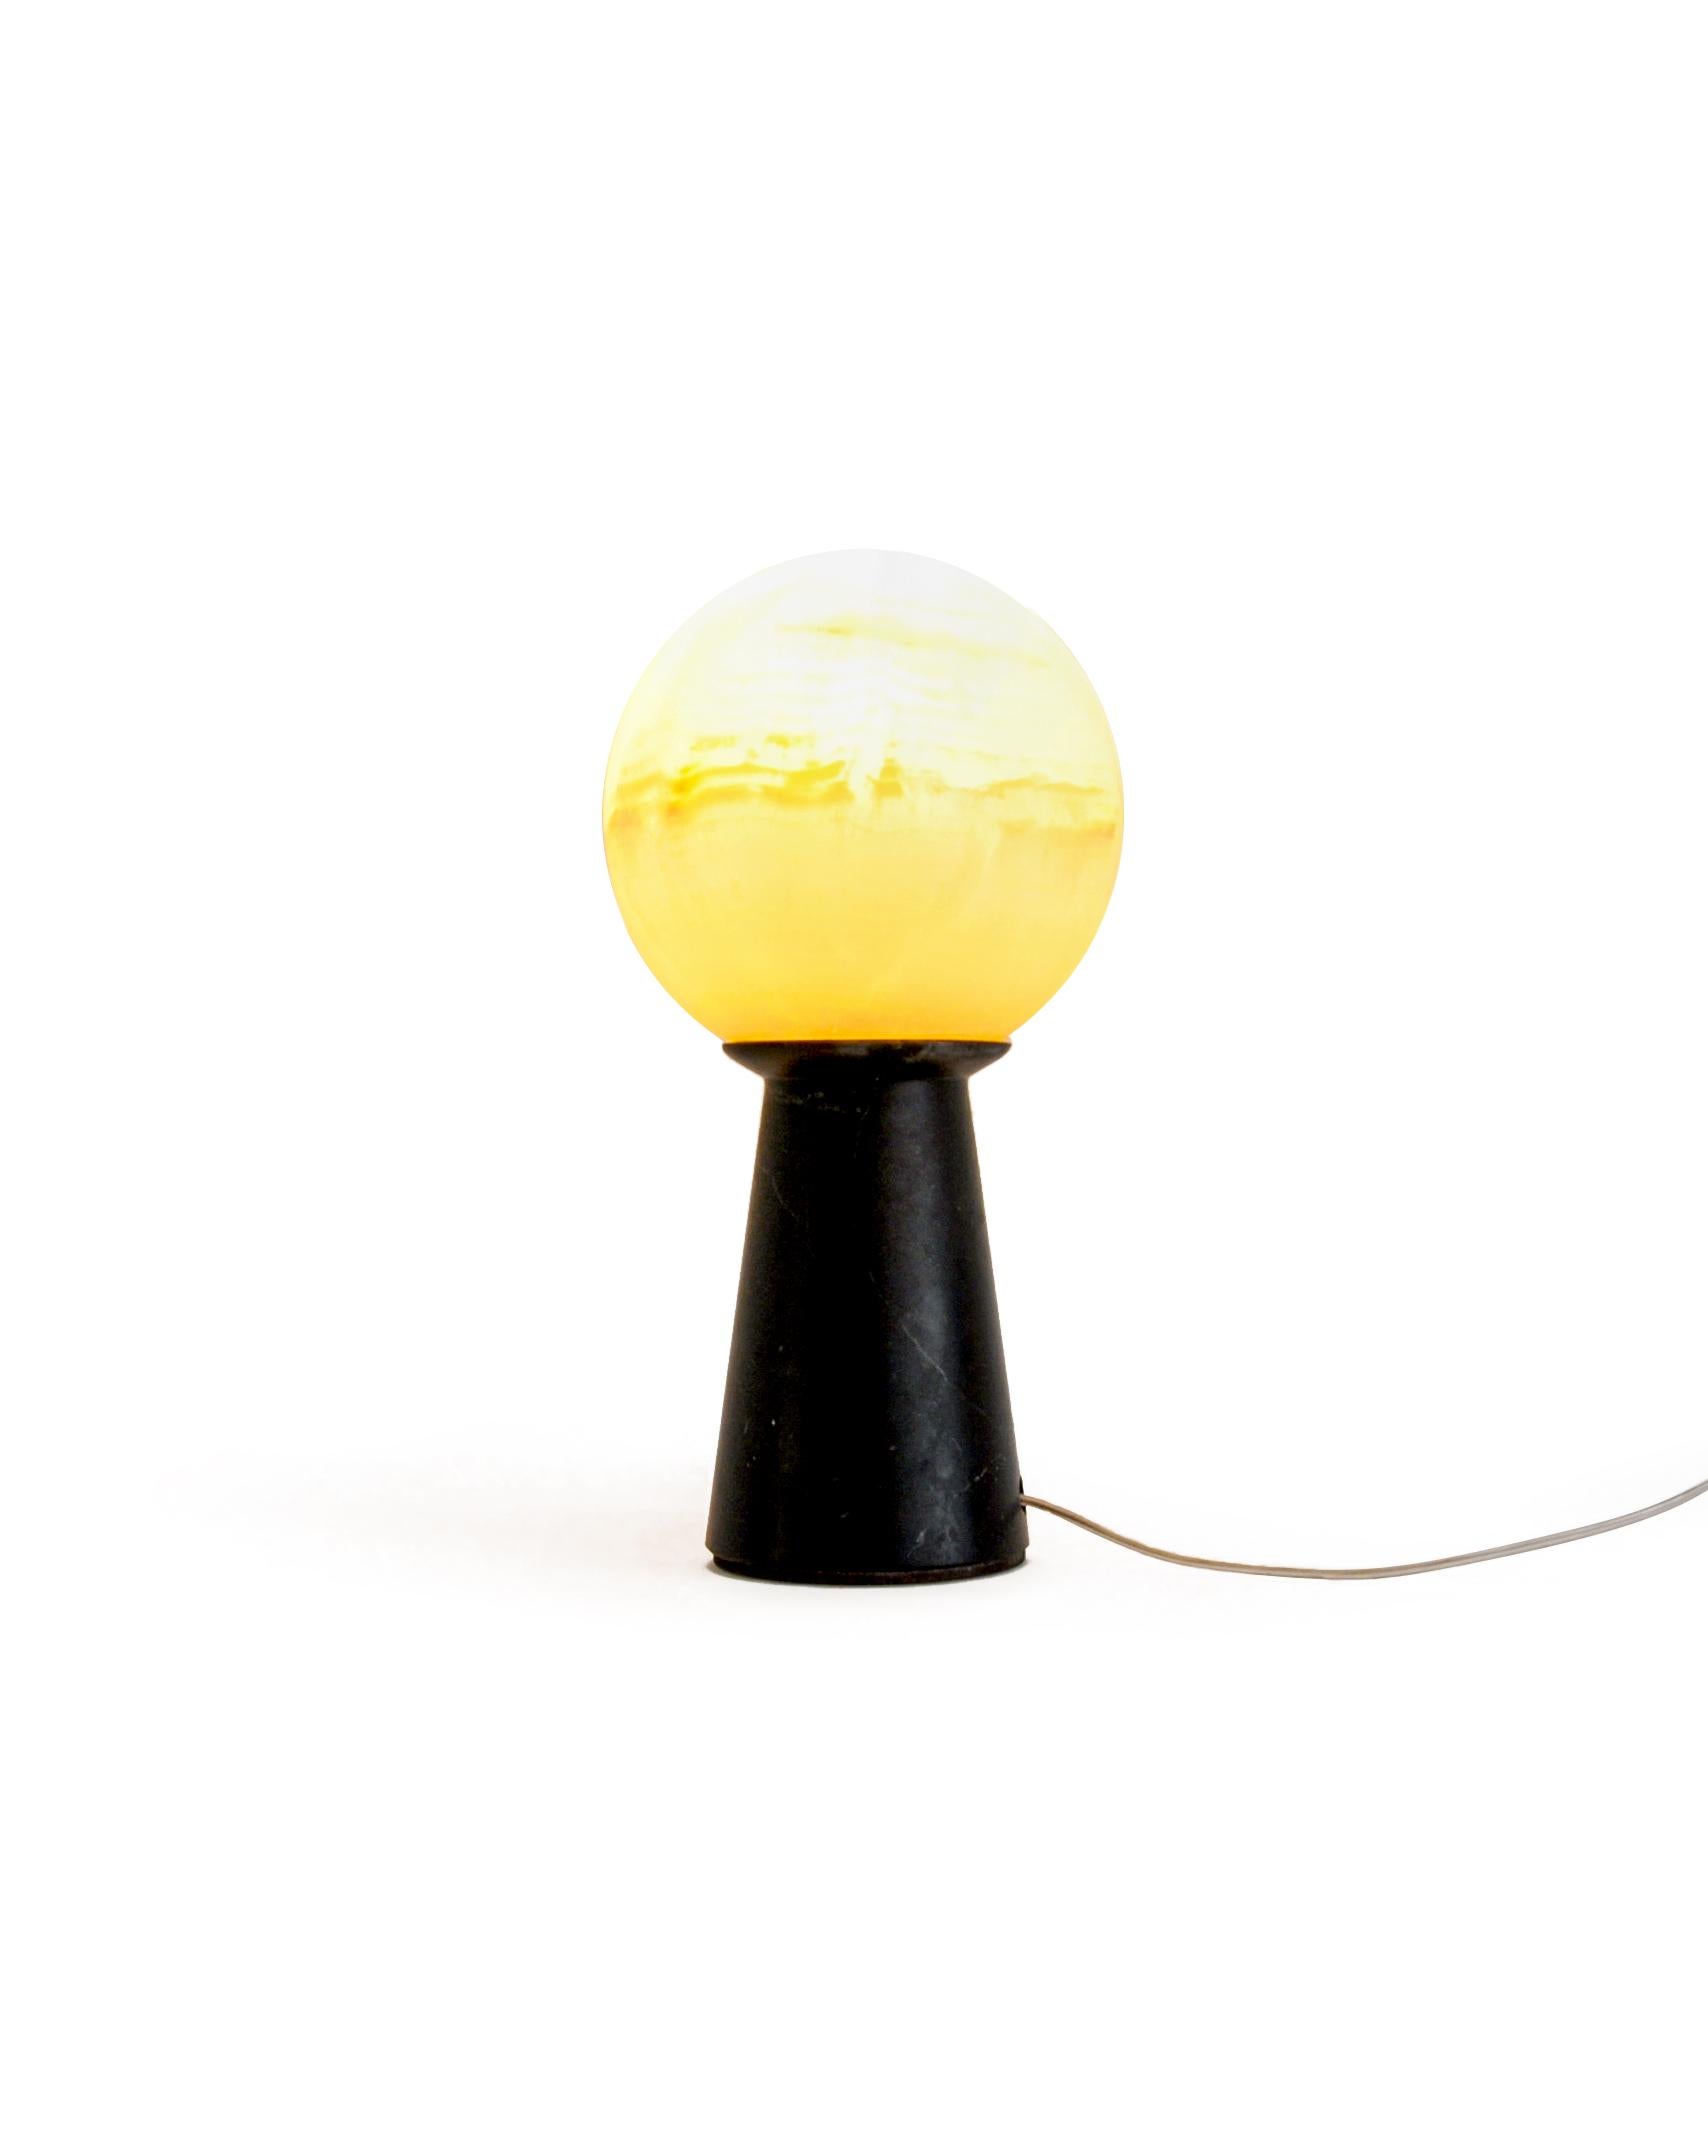 Conical lamp with sphere in satin white Carrara and black Marquina marble. It gives a distinct and elegant touch to your house.

Each piece is in a way unique (every marble block is different in veins and shades) and handmade by Italian artisans